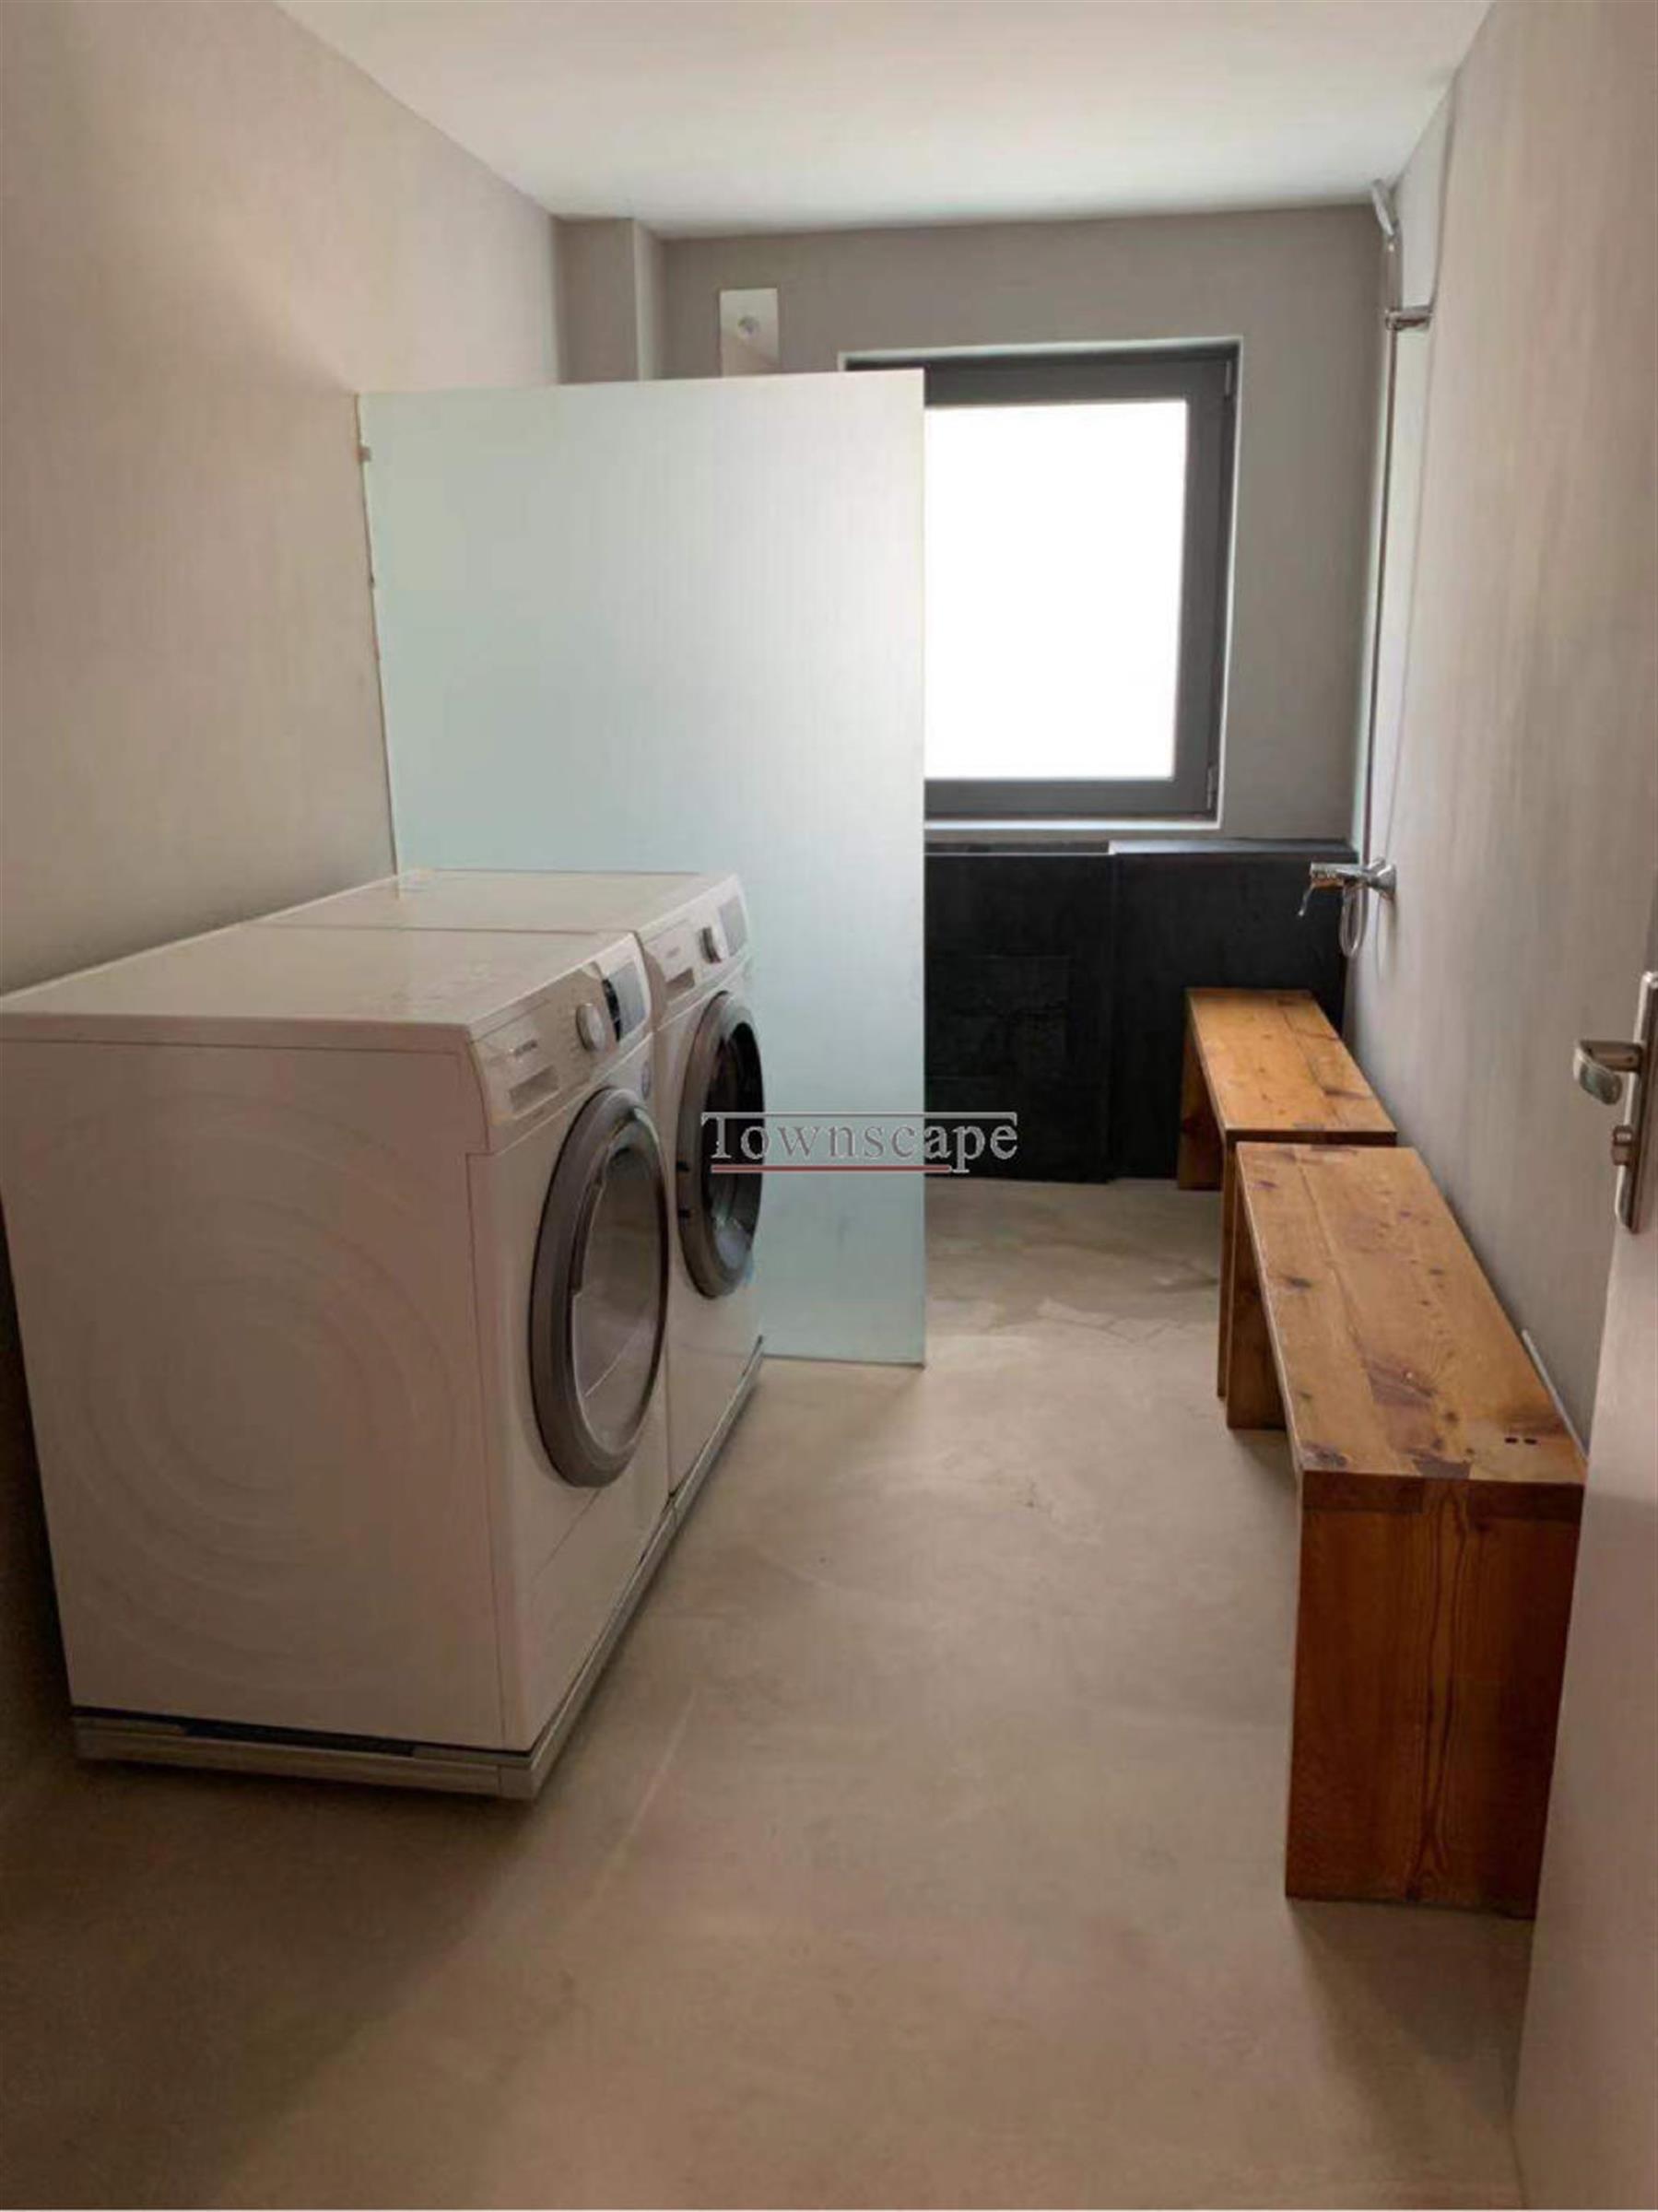 laundry machines Large 3F FFC Lane House for Rent in Shanghai